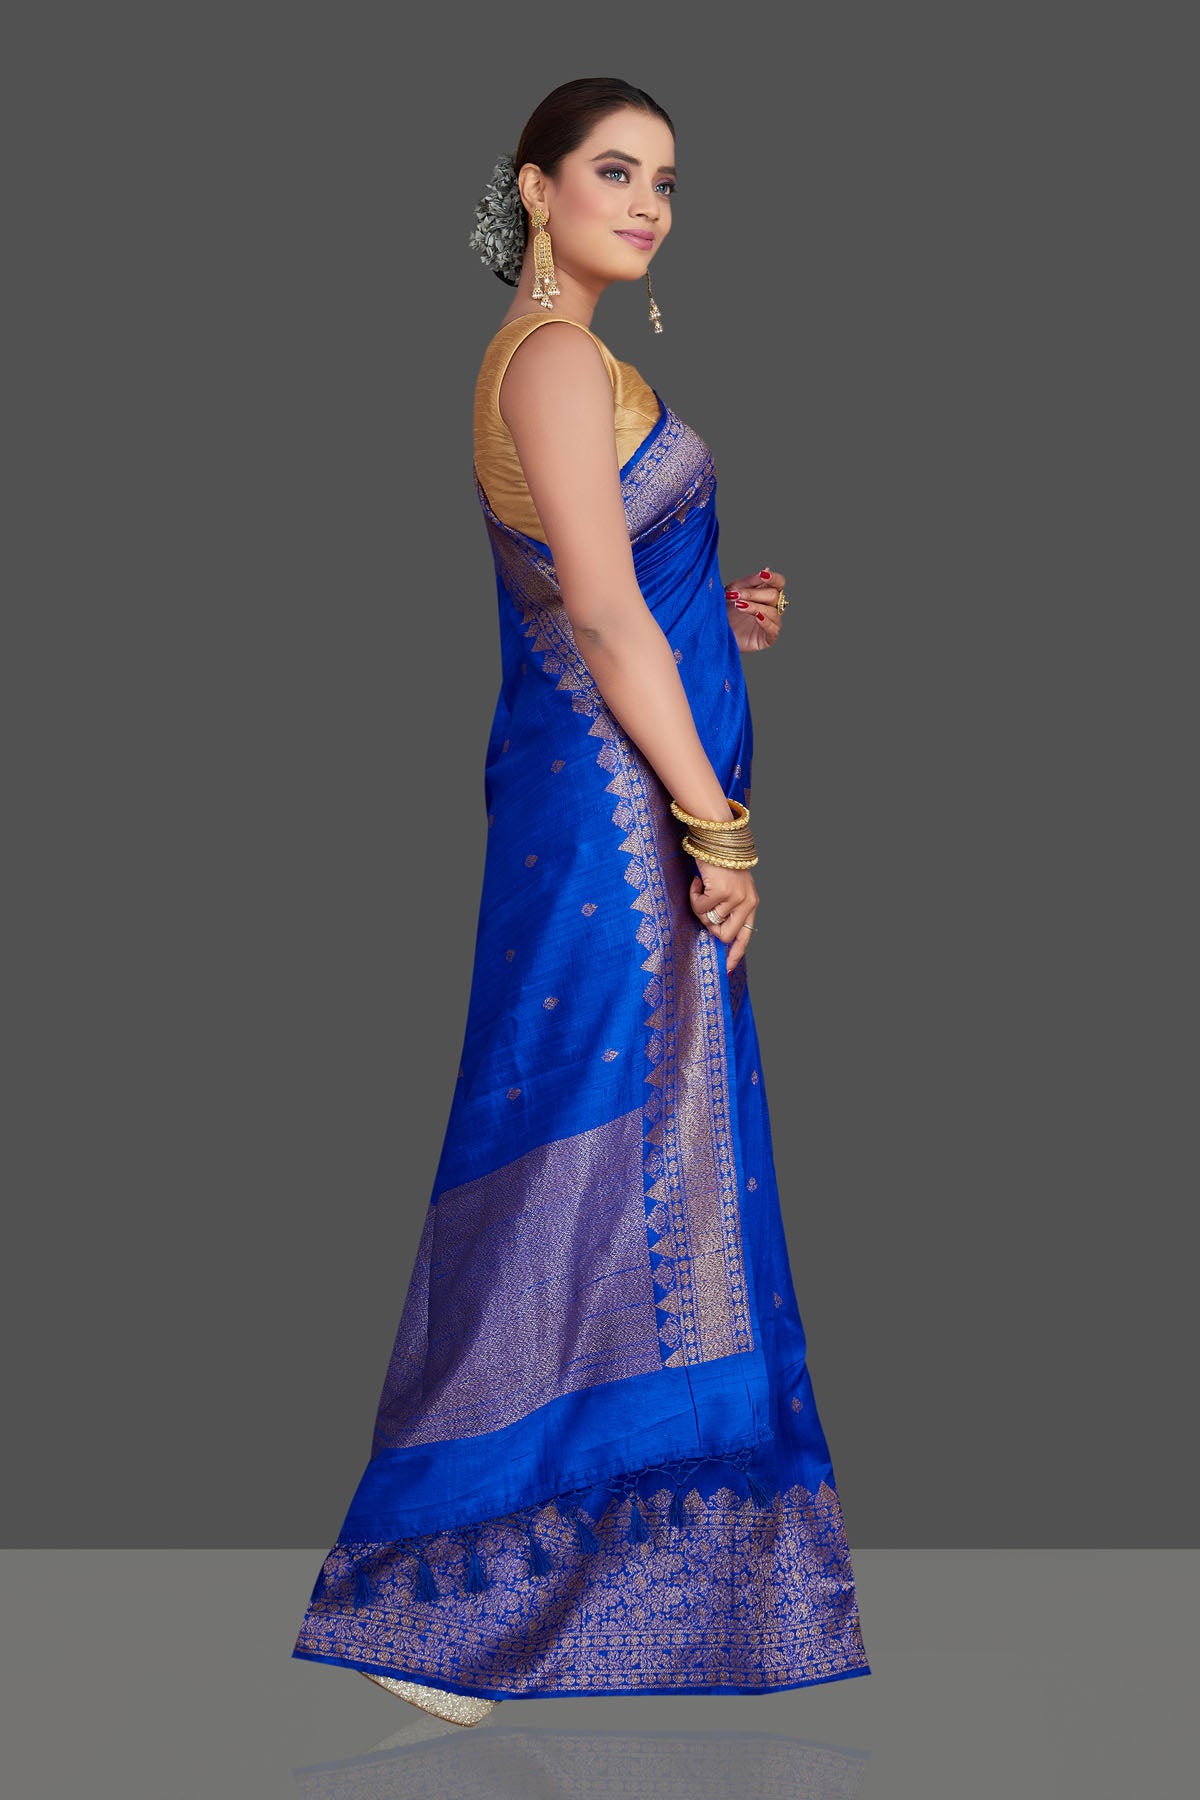 Buy stunning bright blue tussar Banarasi saree online in USA with antique zari border. Look your best on special occasions with stunning Banarasi saris, pure silk sarees, tussar sarees, handwoven sarees from Pure Elegance Indian saree store in USA.-side